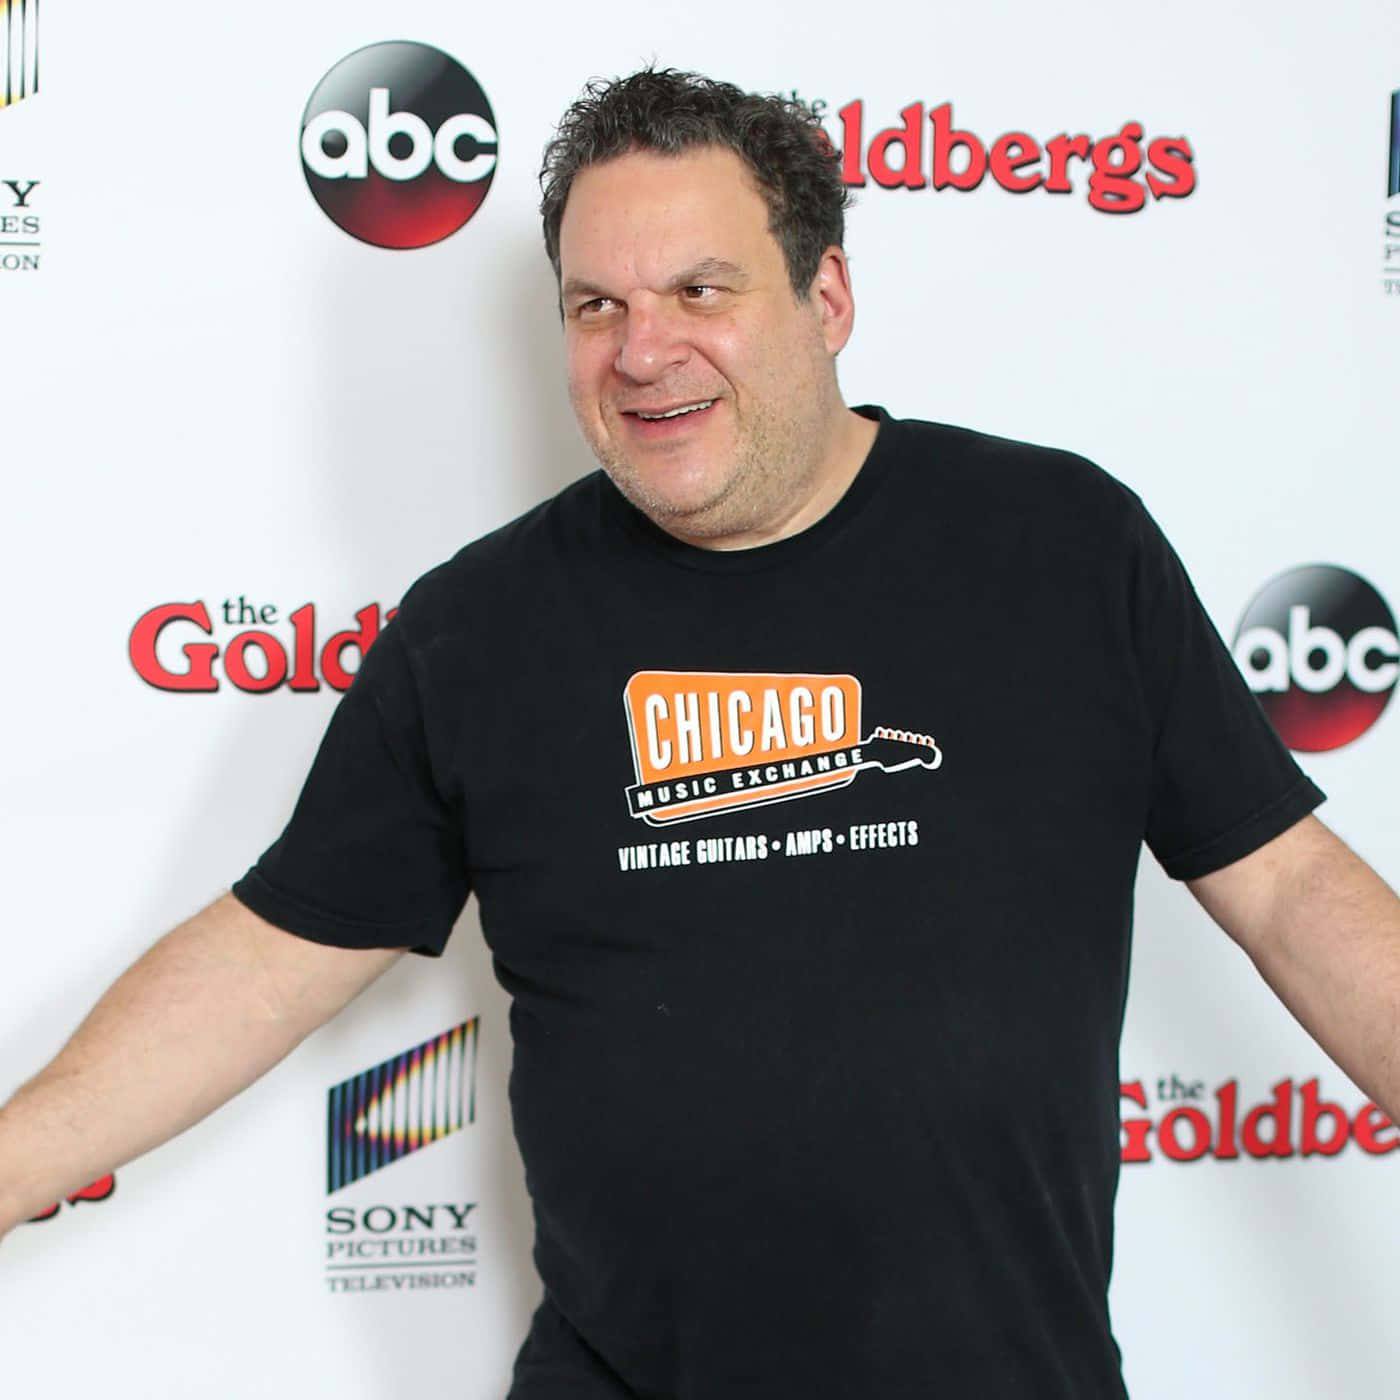 Jeffgarlin Is An American Actor, Comedian, And Director. He Is Best Known For His Role As Jeff Greene On The Hbo Show 